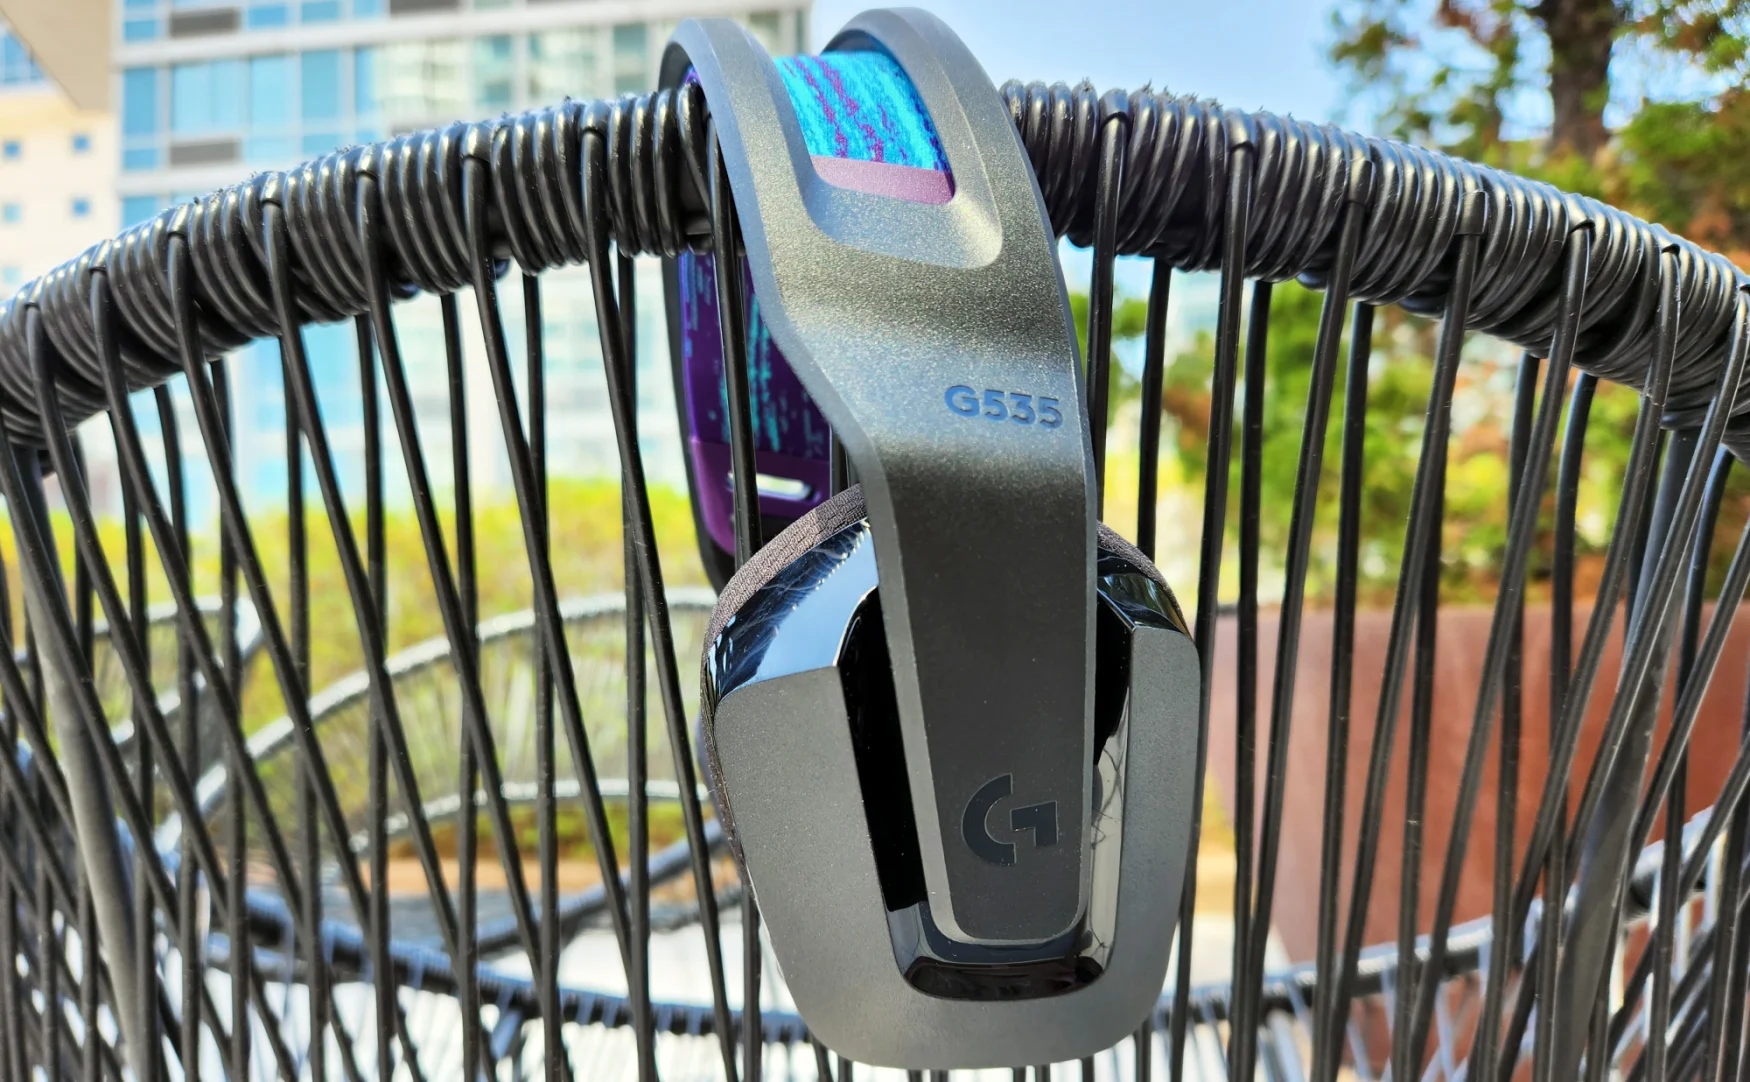 Logitech's G535 wireless gaming headset rests on top of a wicker chair on a patio outdoors.